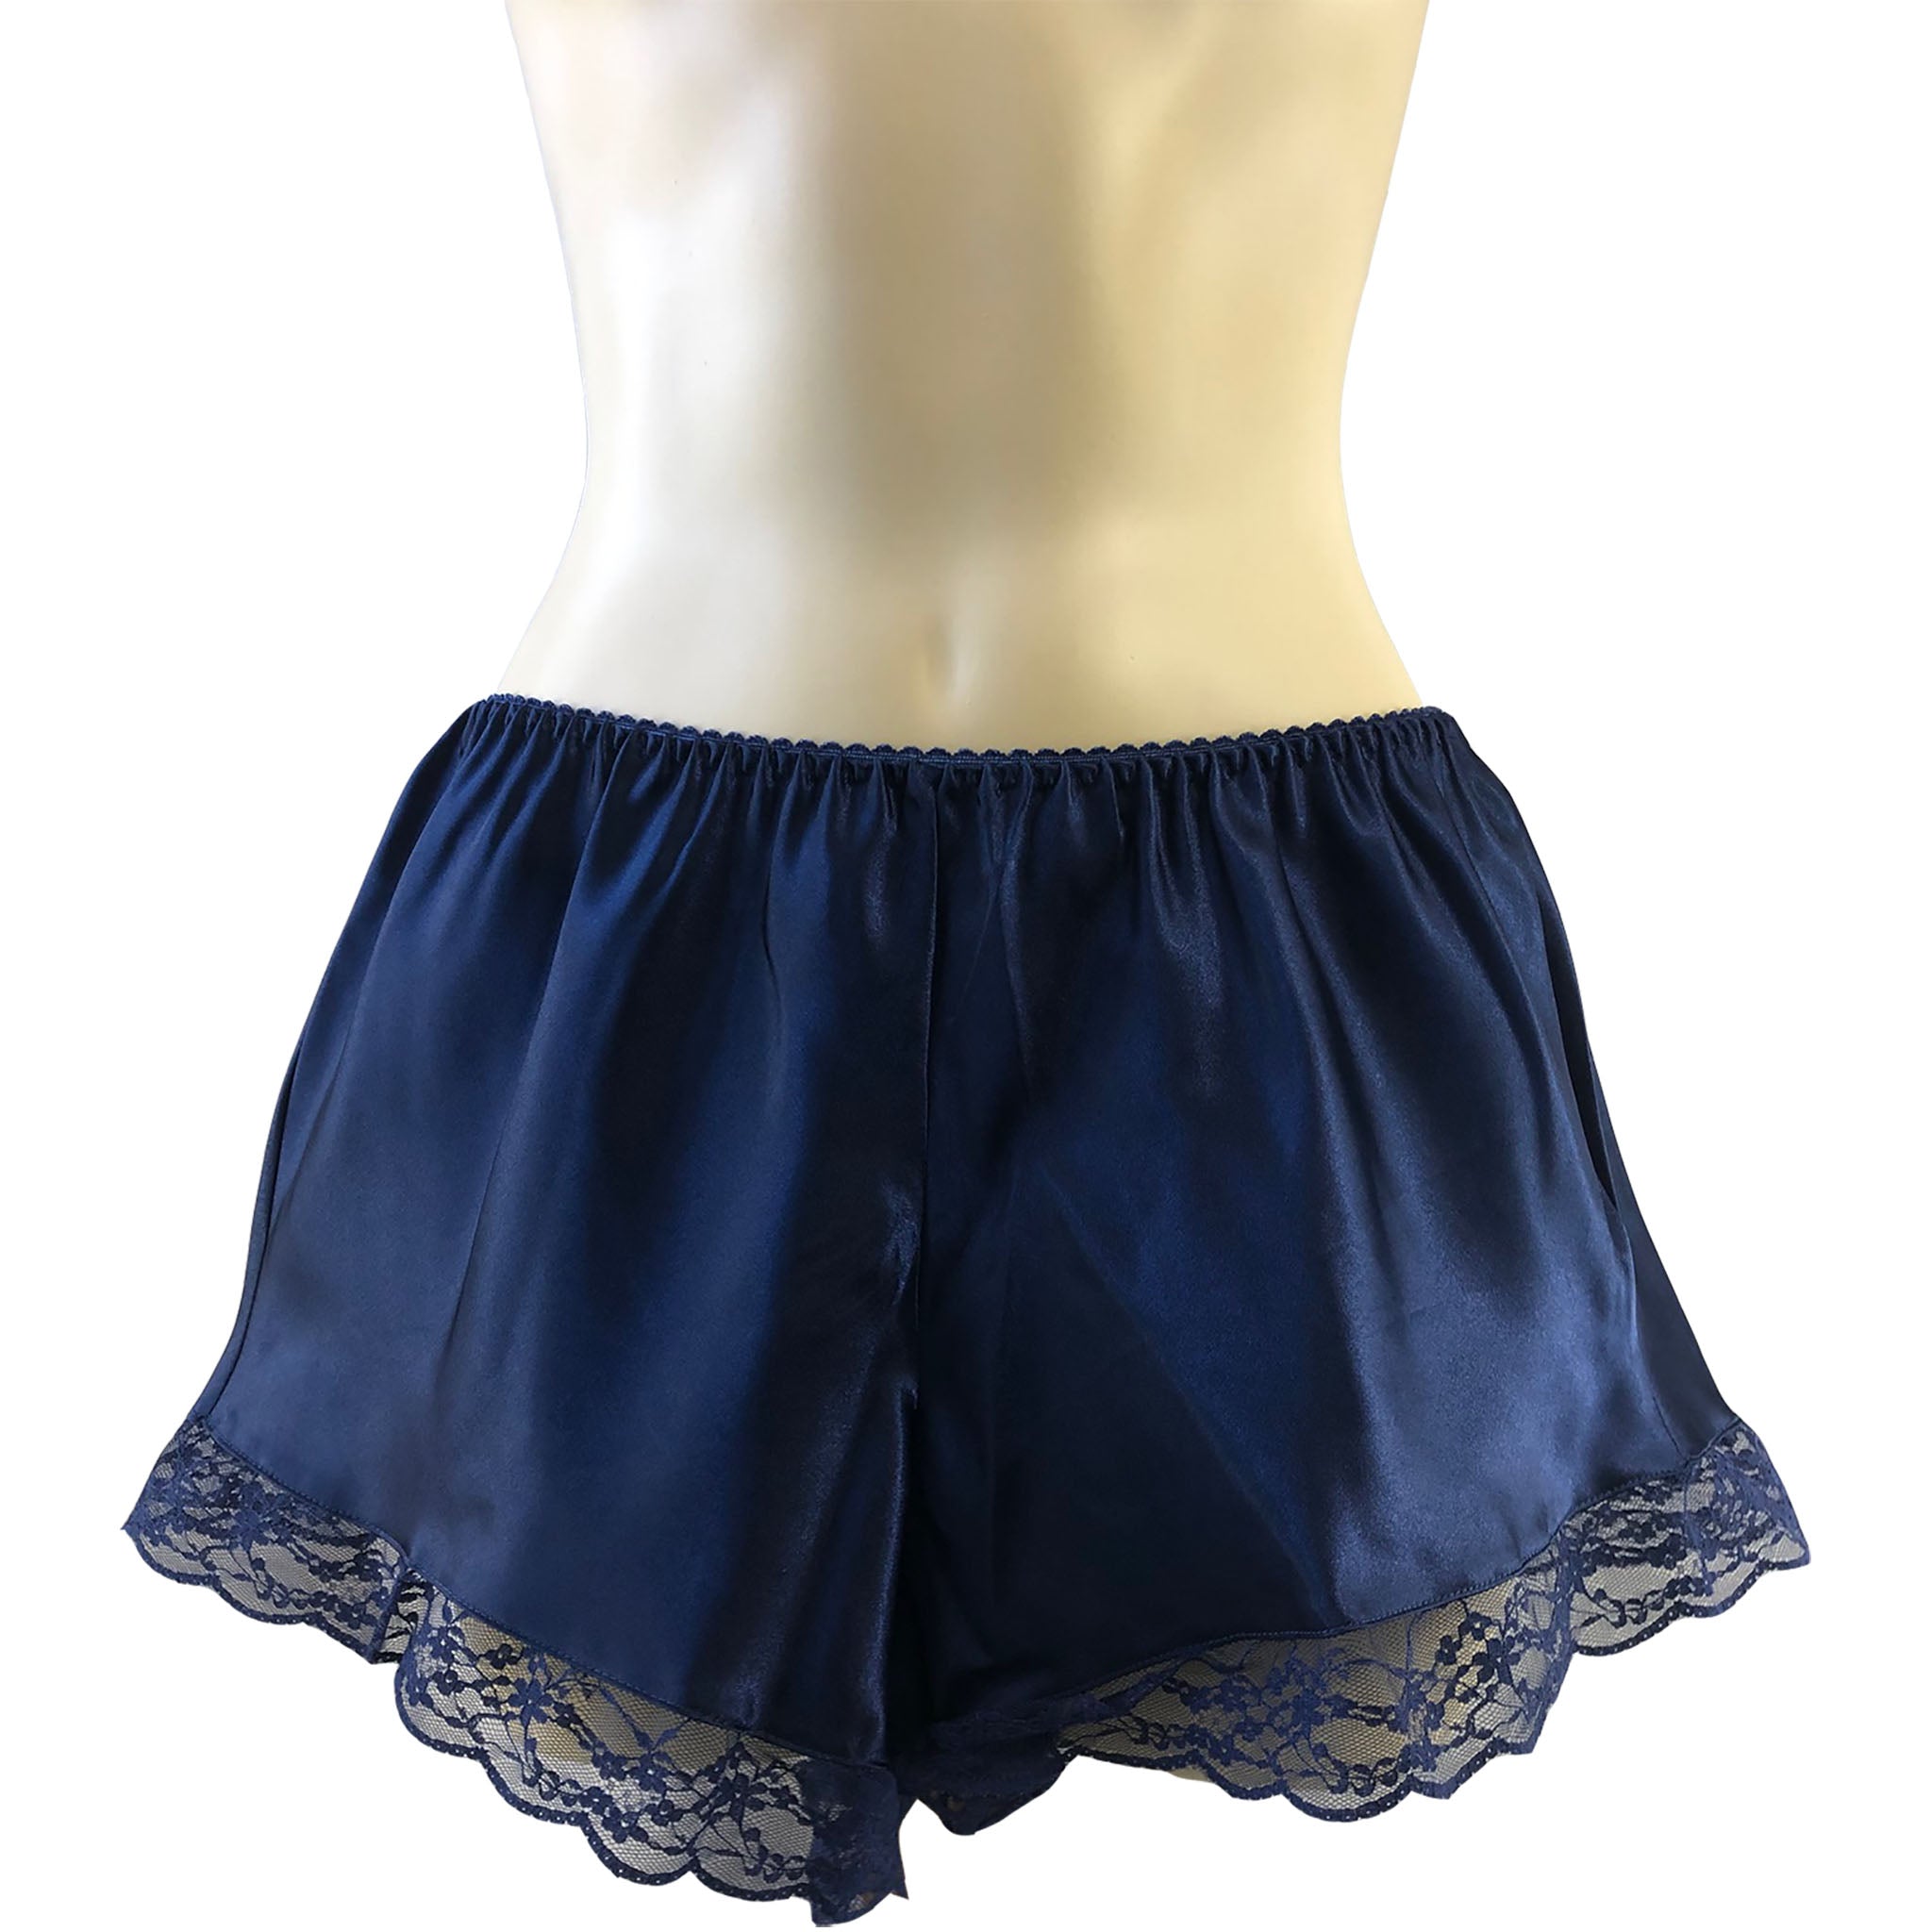 Navy Blue Sexy Satin Lace French Knickers Shorts Negligee Lingerie